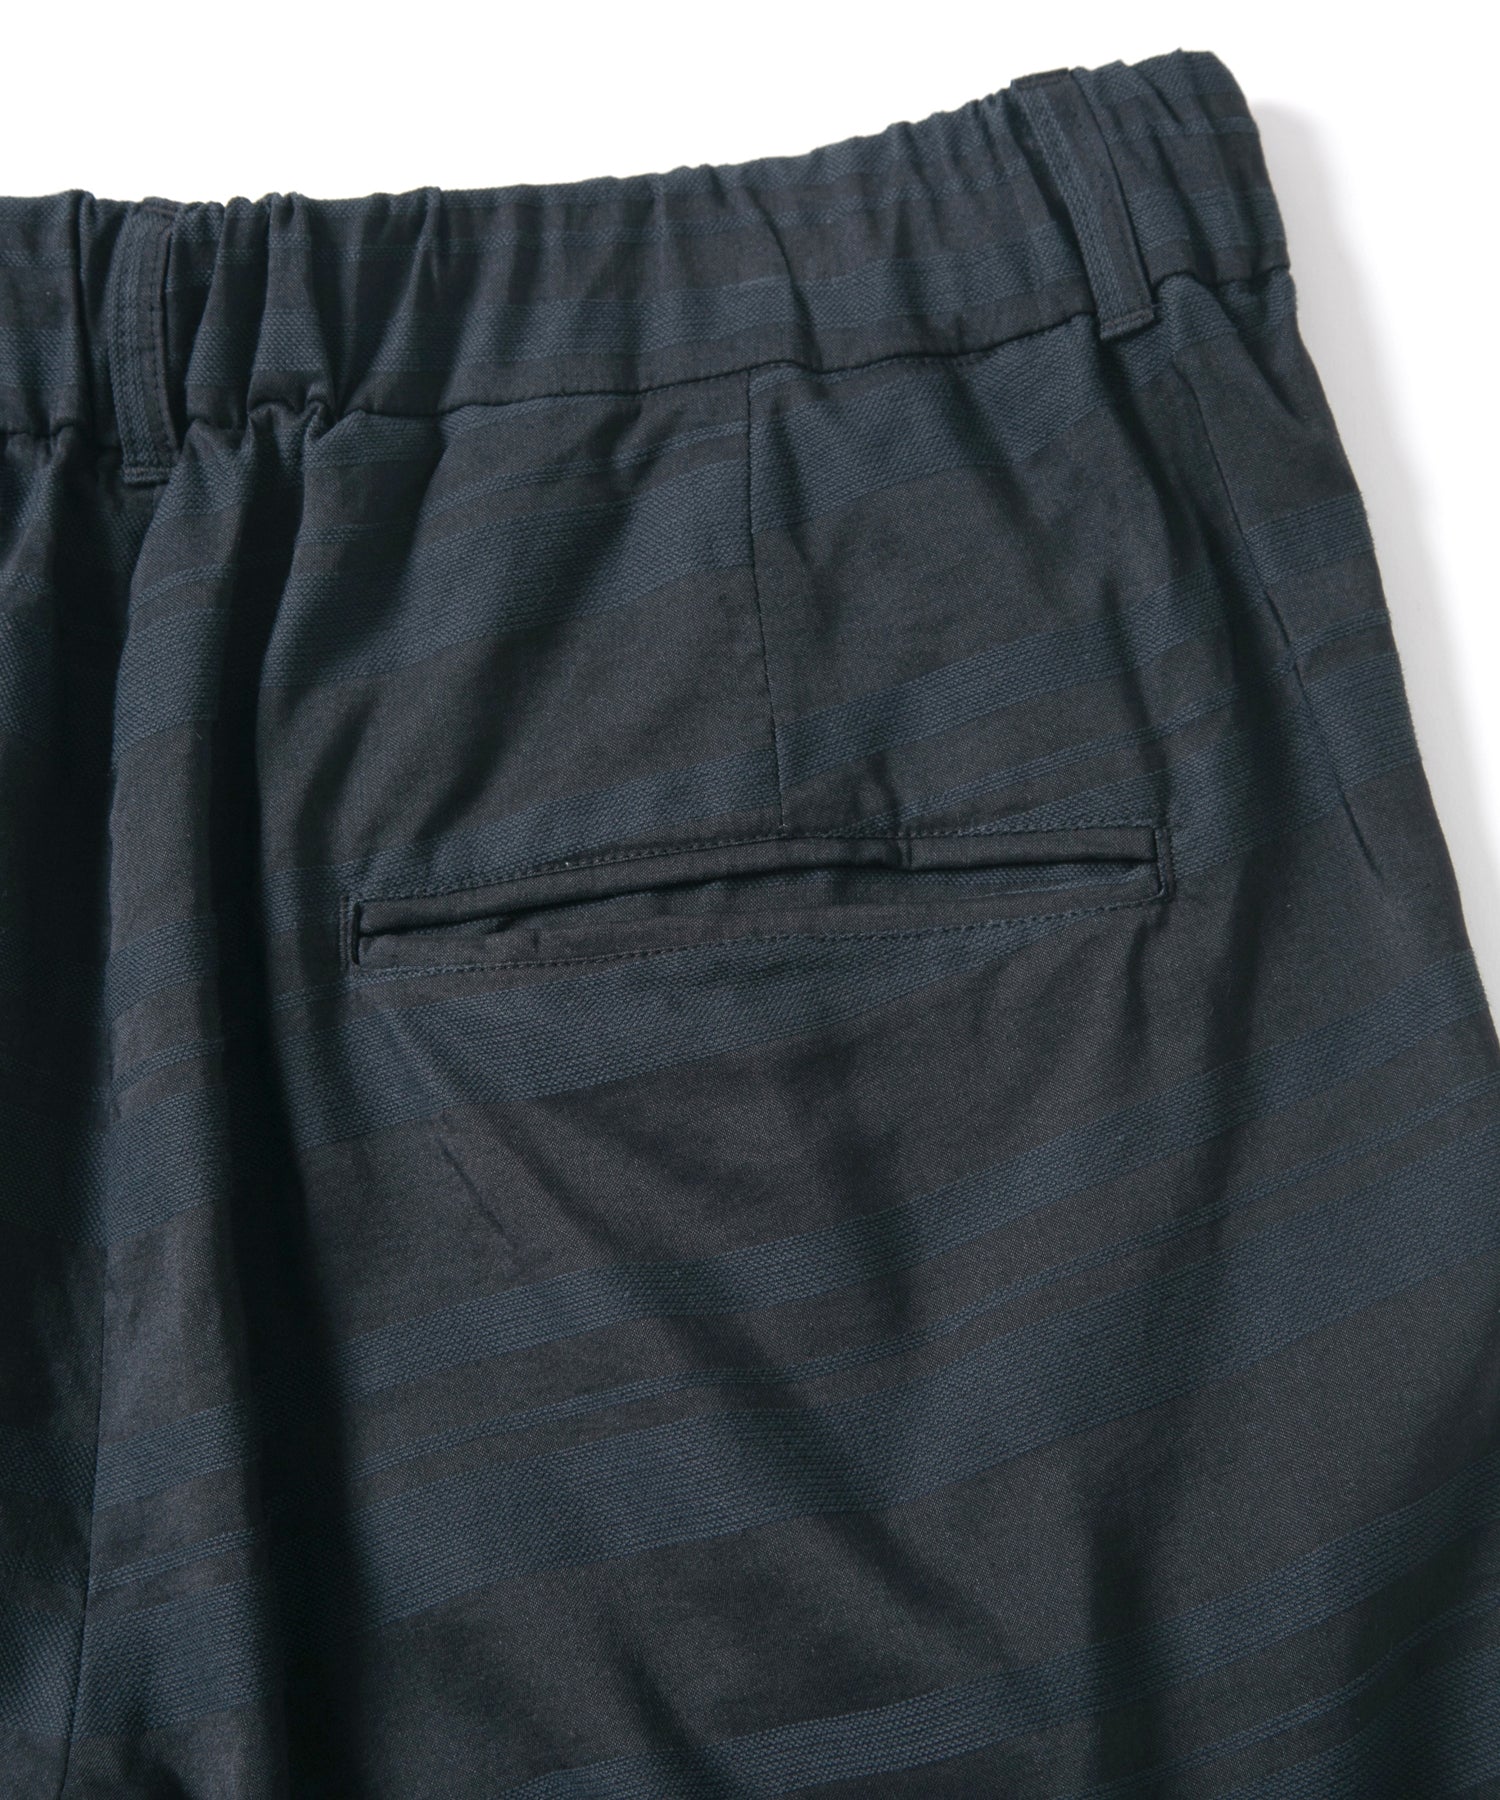 Load image into Gallery viewer, Rayon Cotton Ramie Stripe Cloth Shorts - BLACK